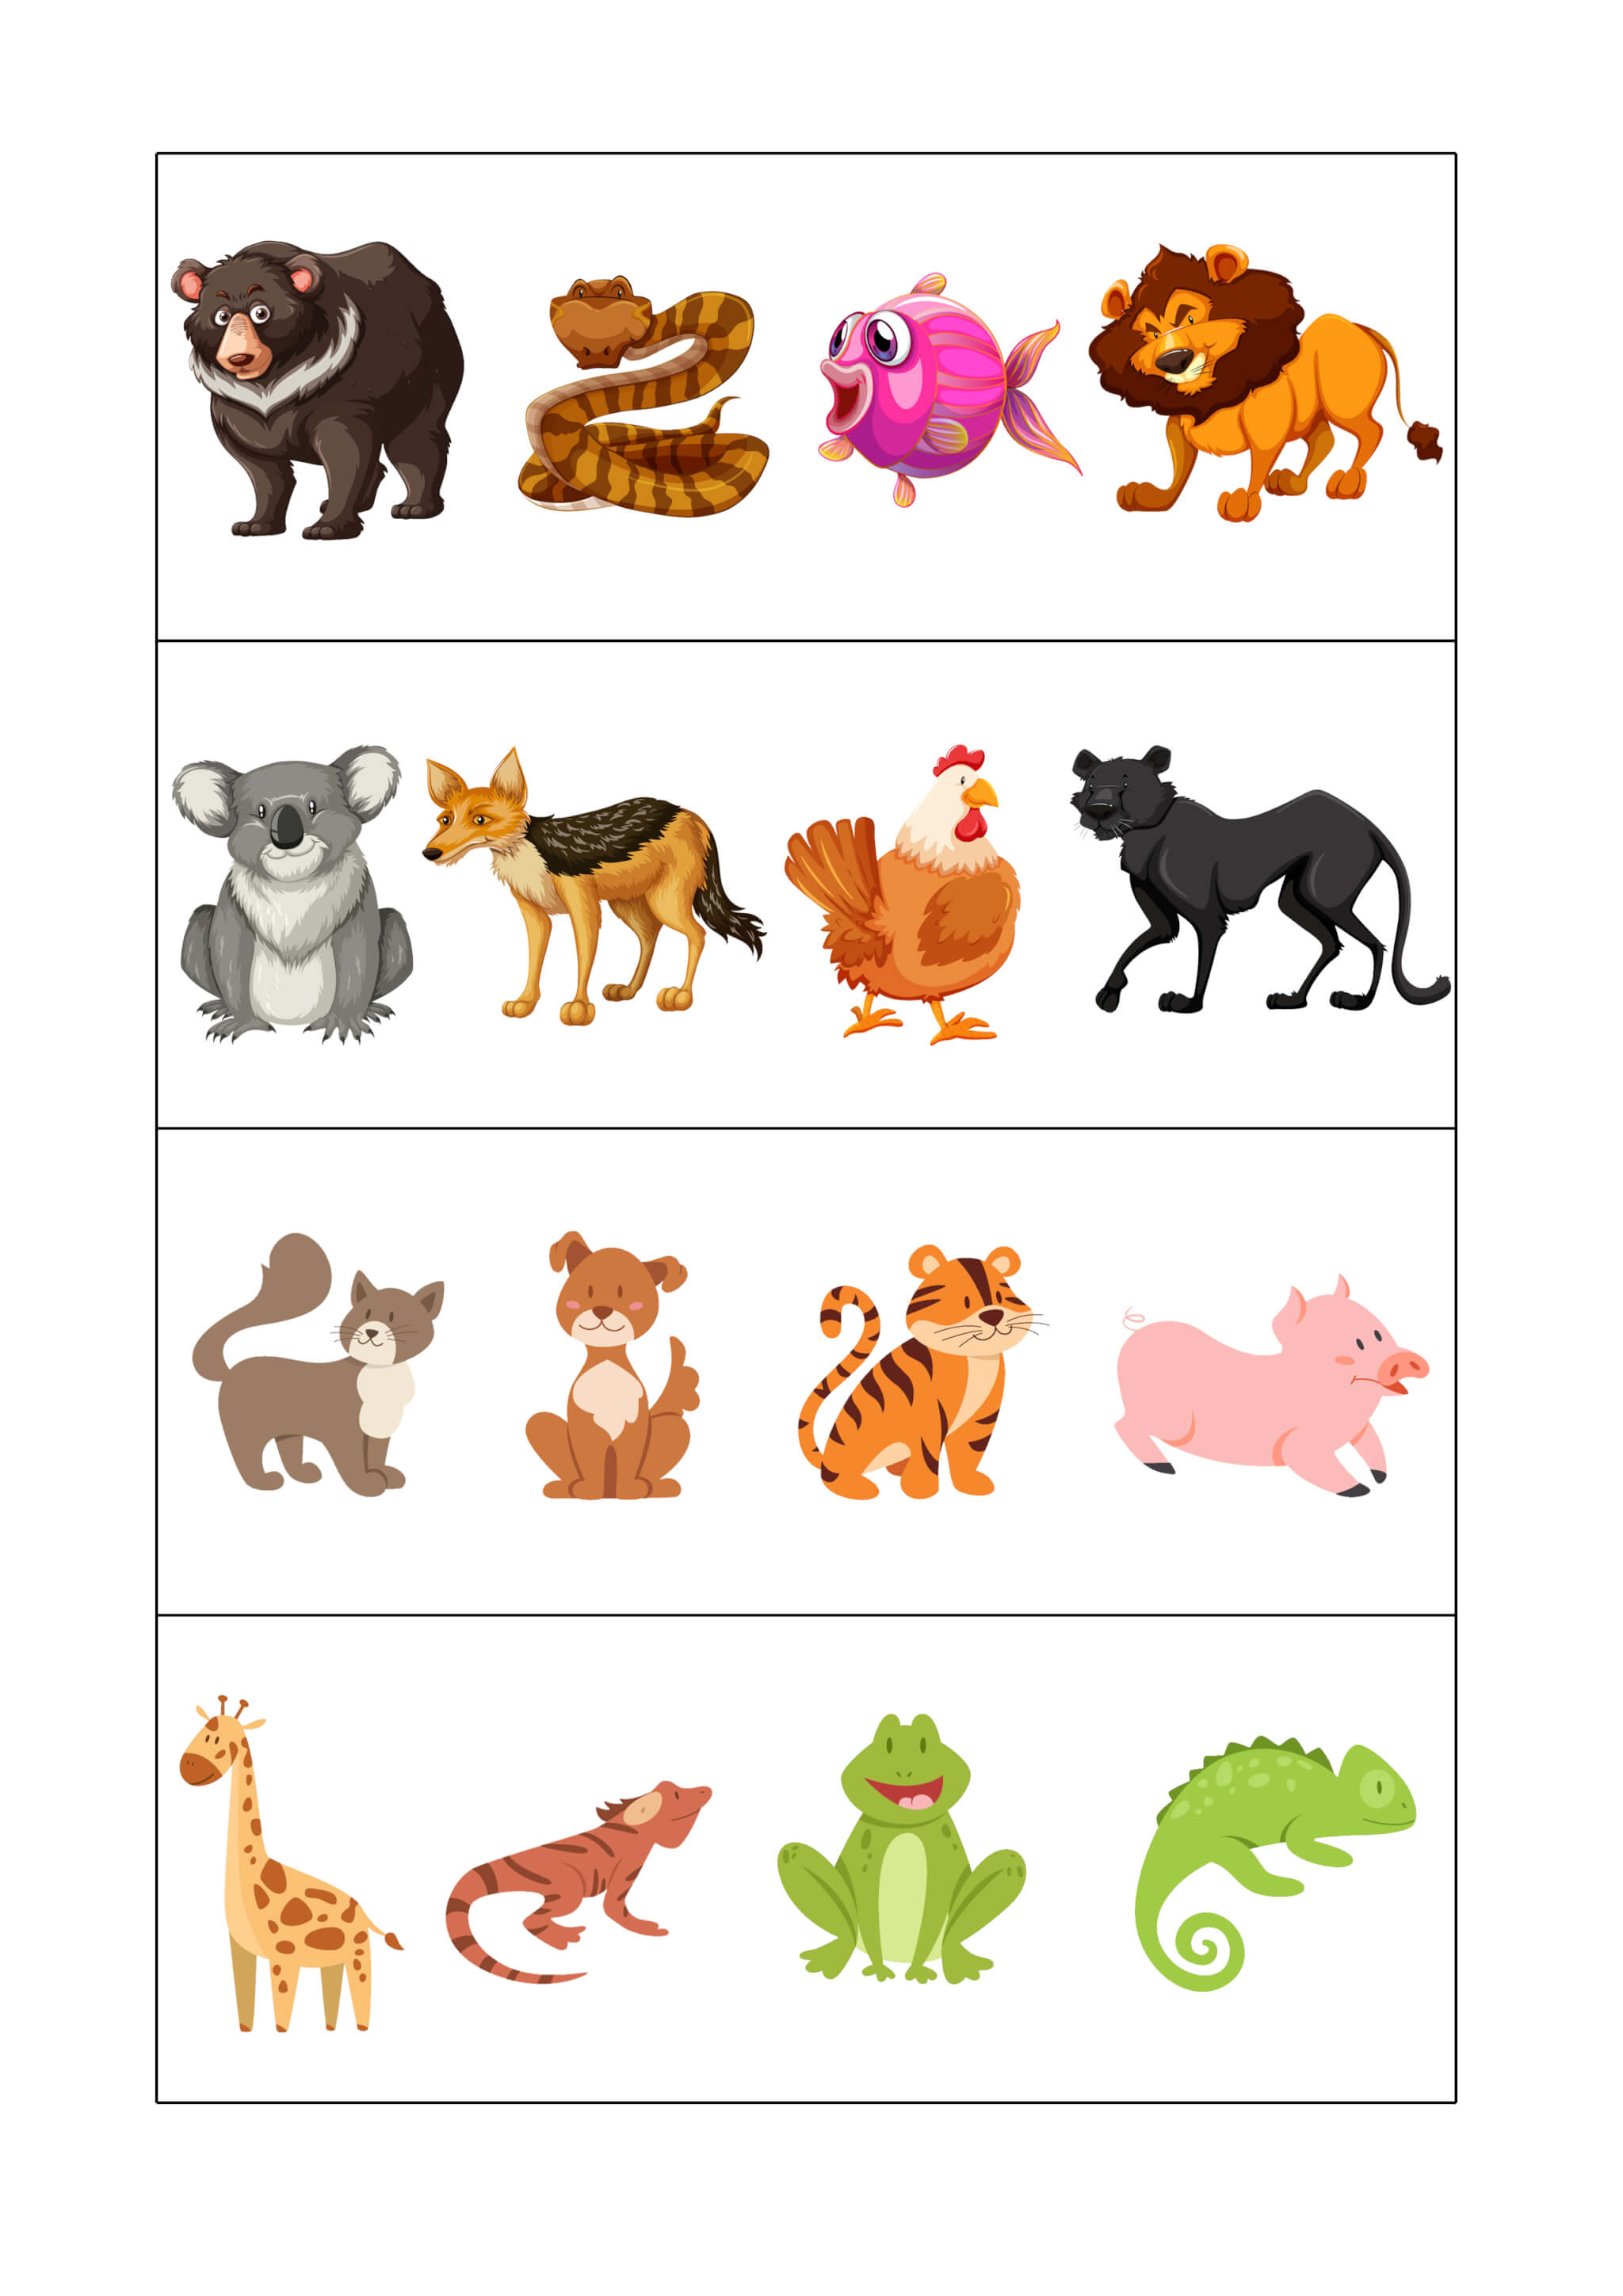 Worksheet for Preschoolers One is Out - Image 3